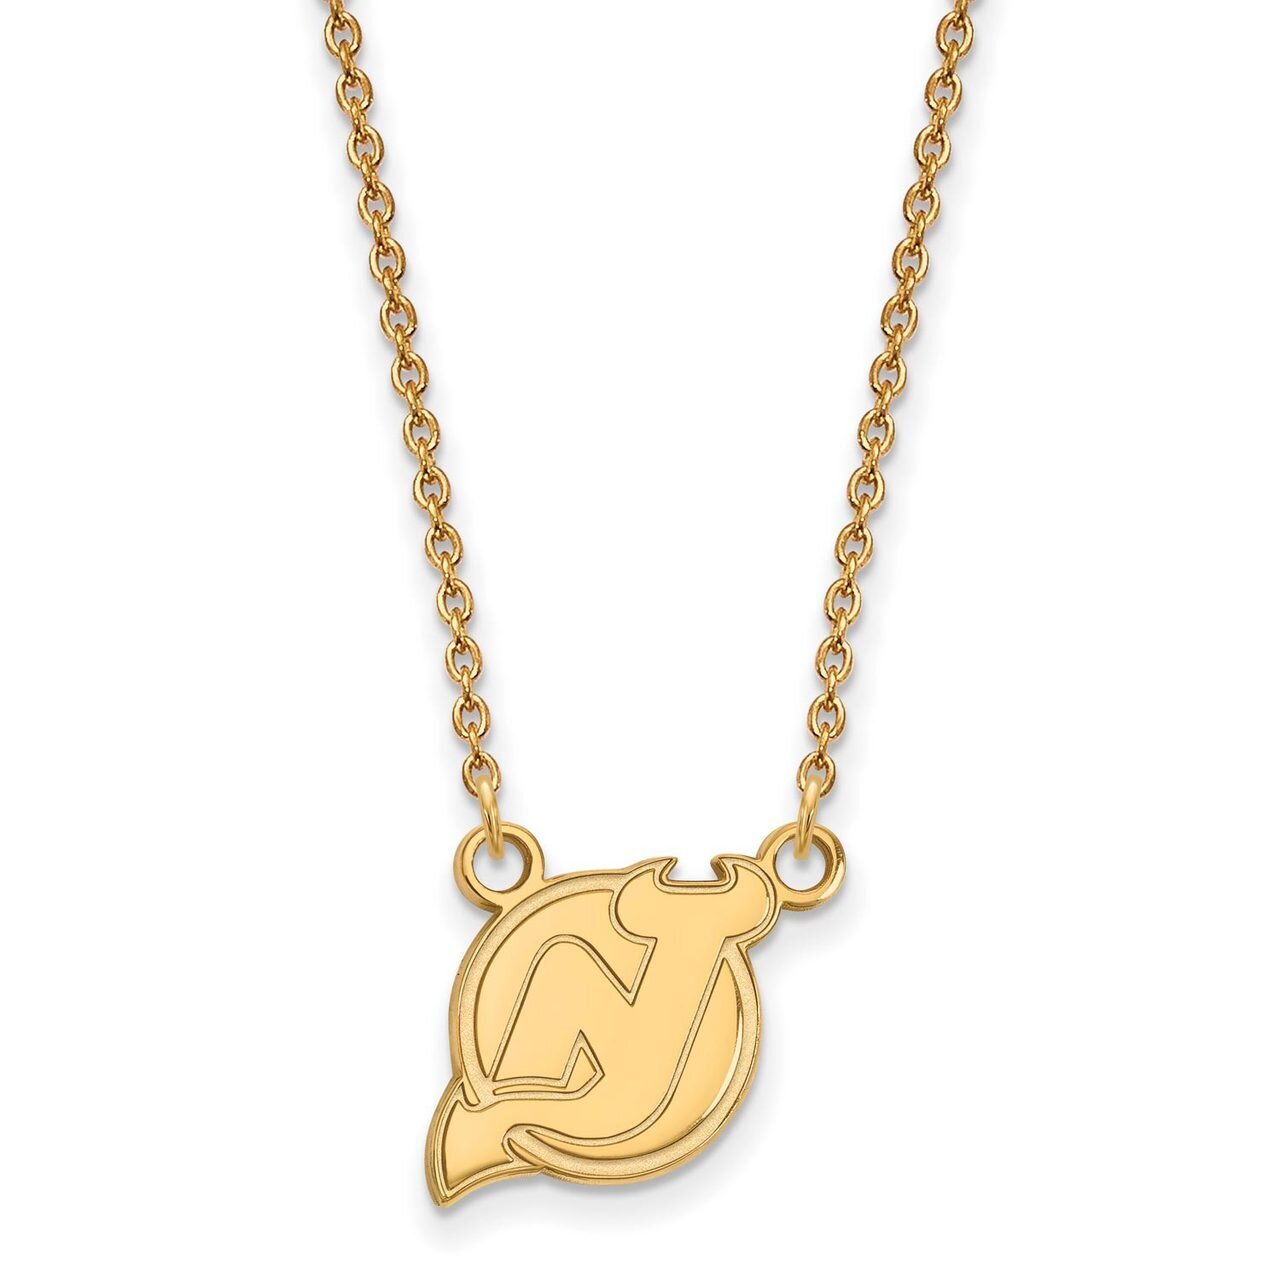 New Jersey Devils Small Pendant with Chain Necklace 14k Yellow Gold 4Y013DVL-18